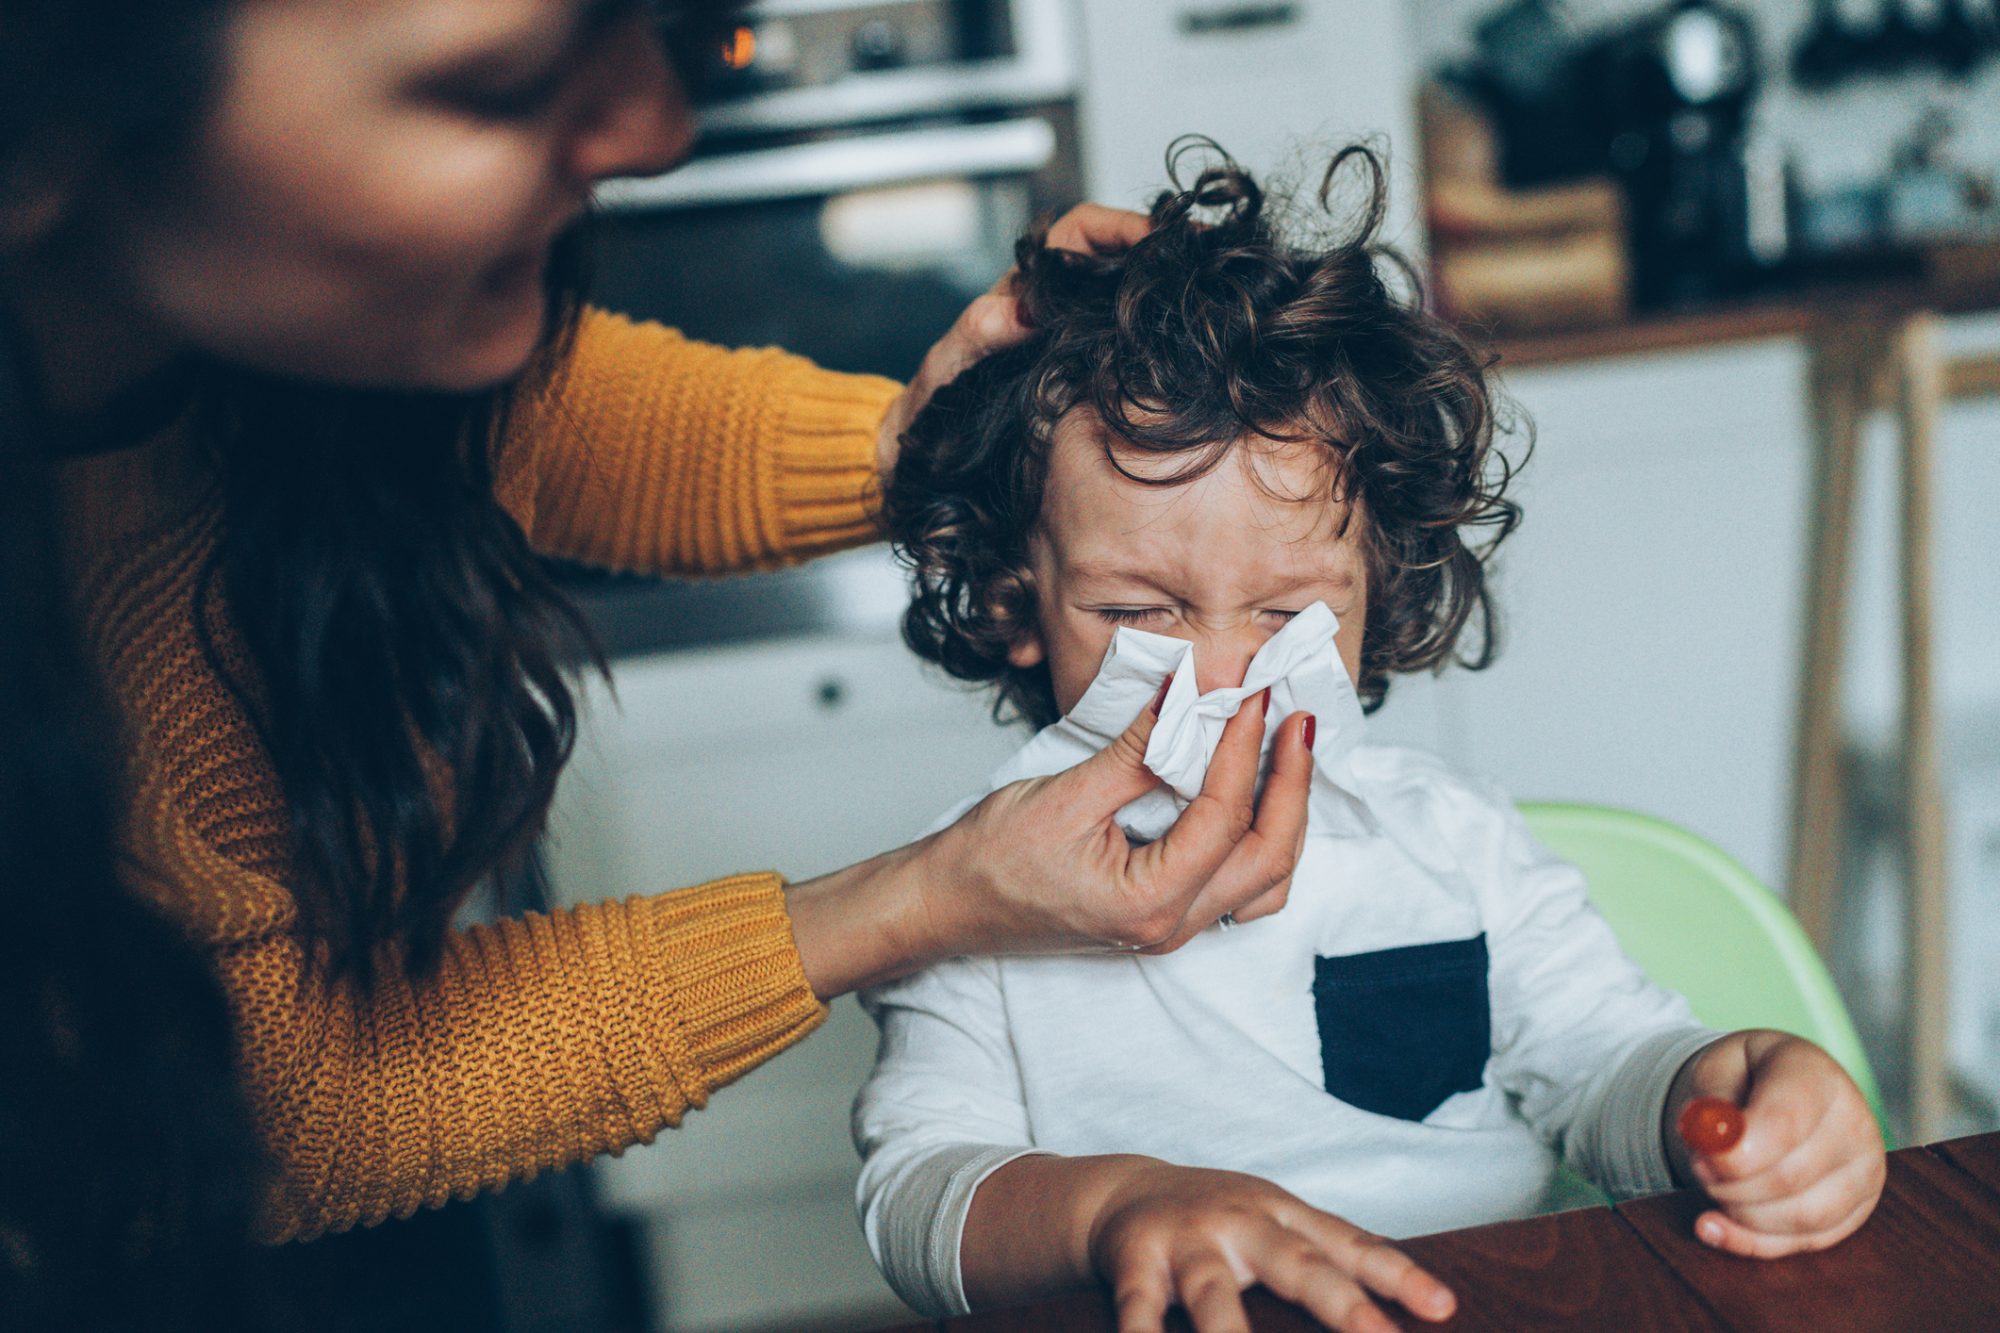 An image of a mom helping a child blow their nose.